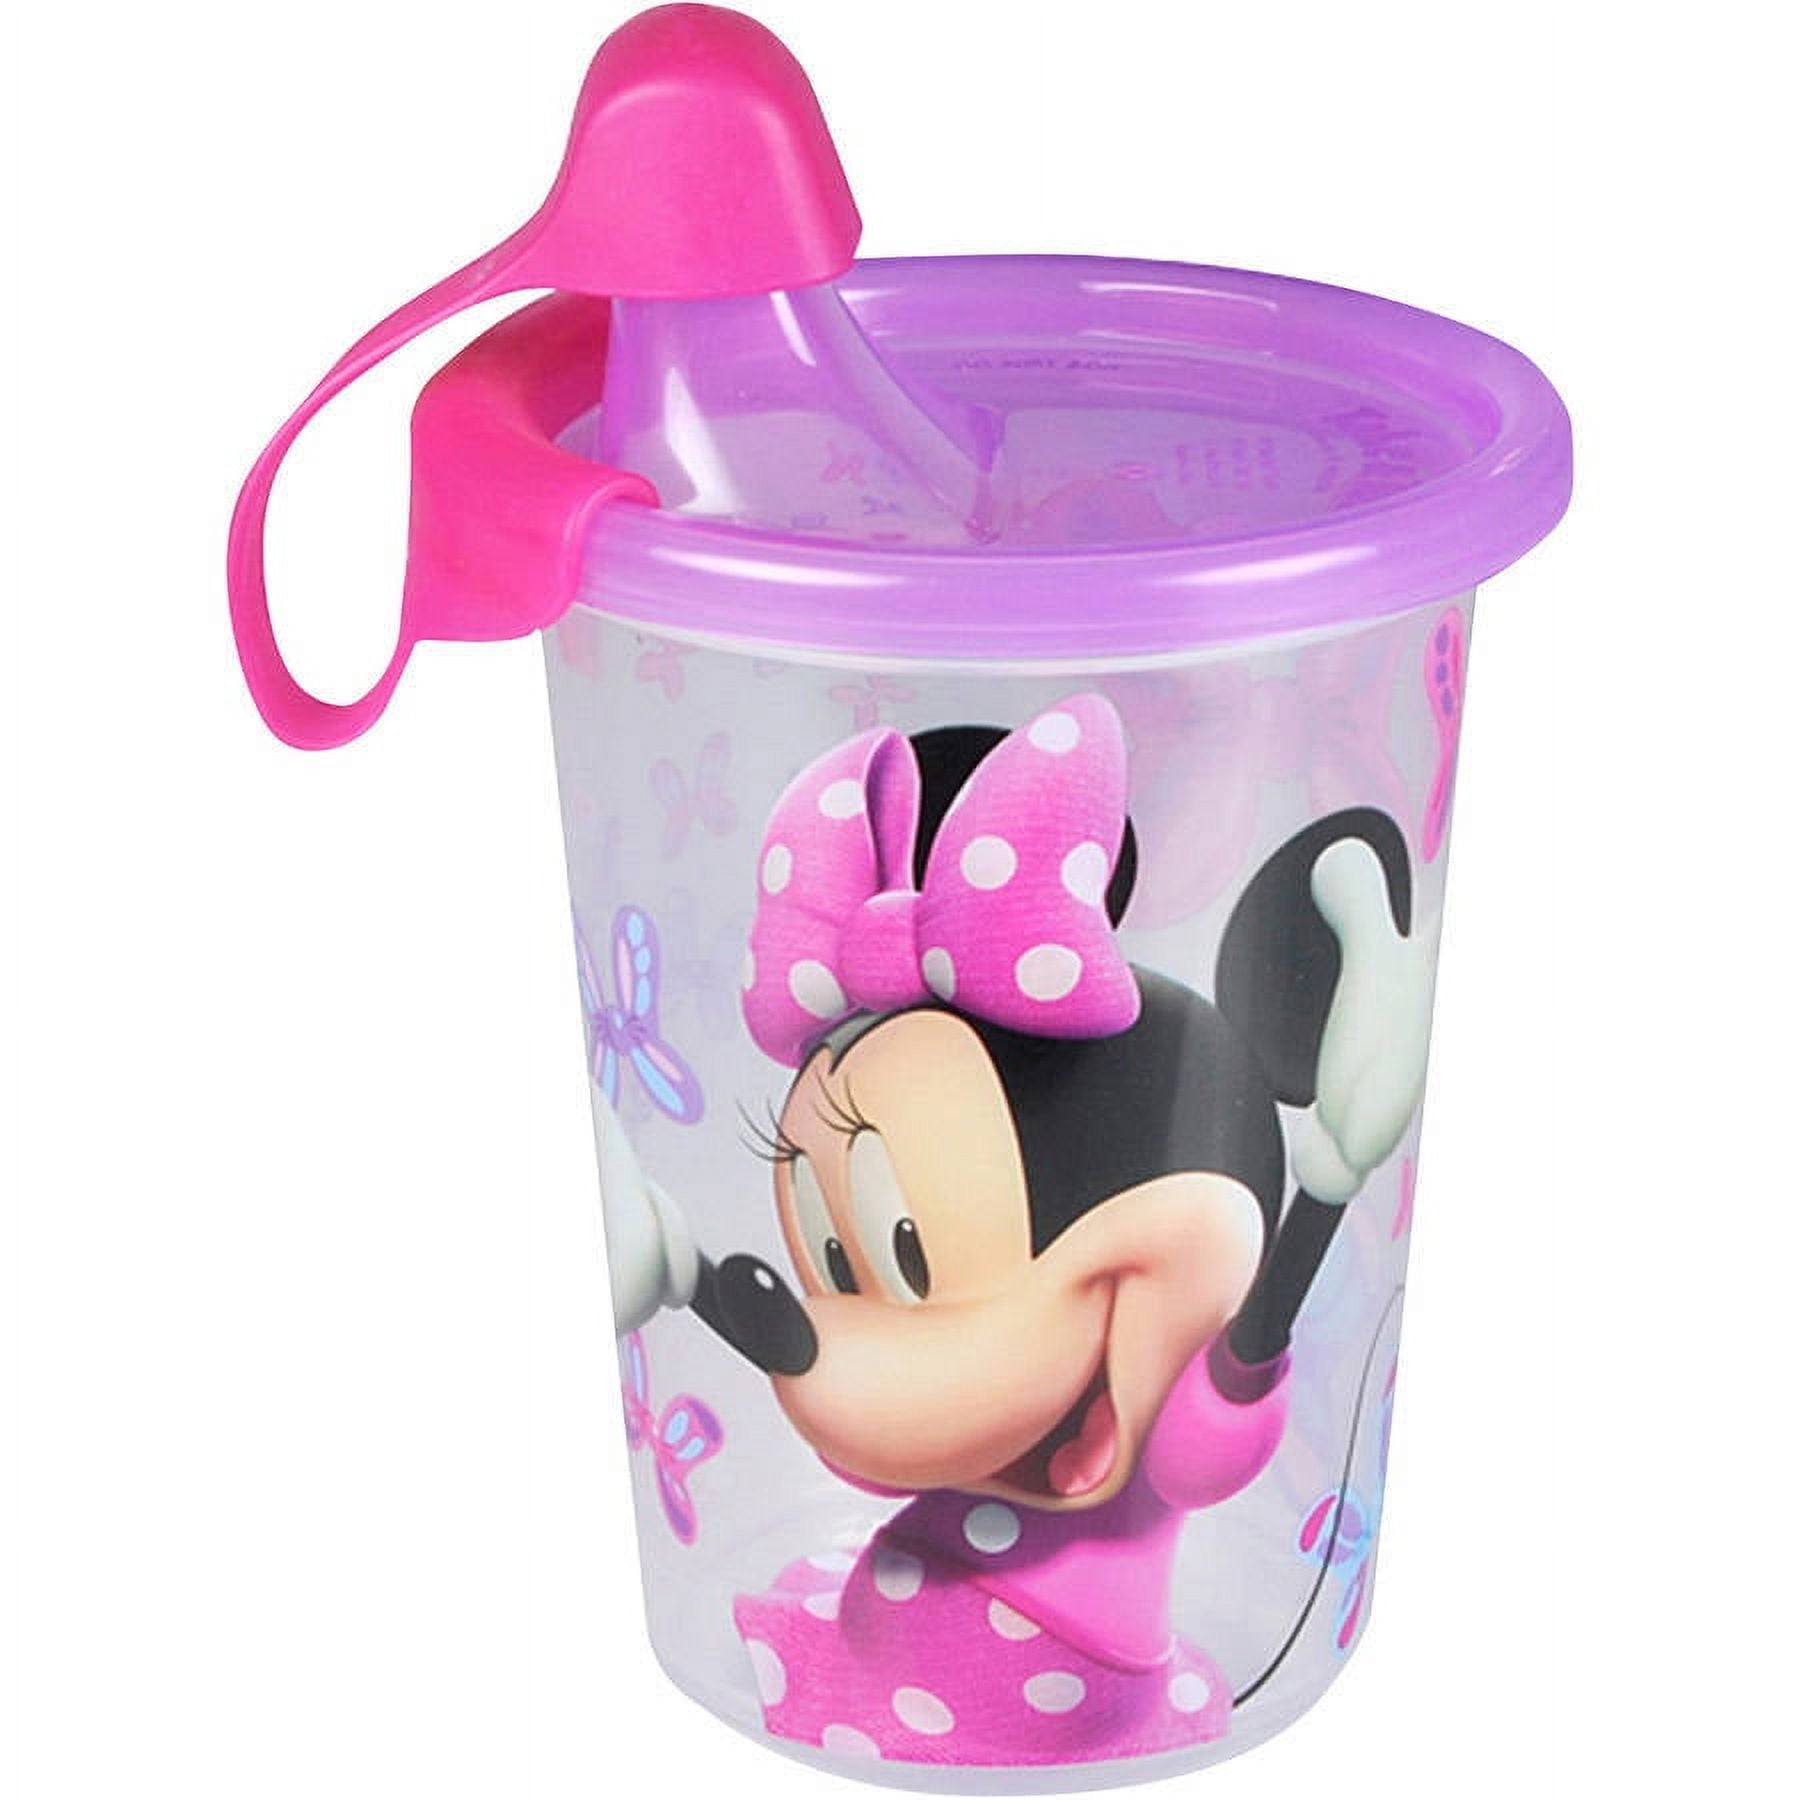 Disney Baby Minnie Mouse Take & Toss® 10 oz. Sippy Cups (3-pack)